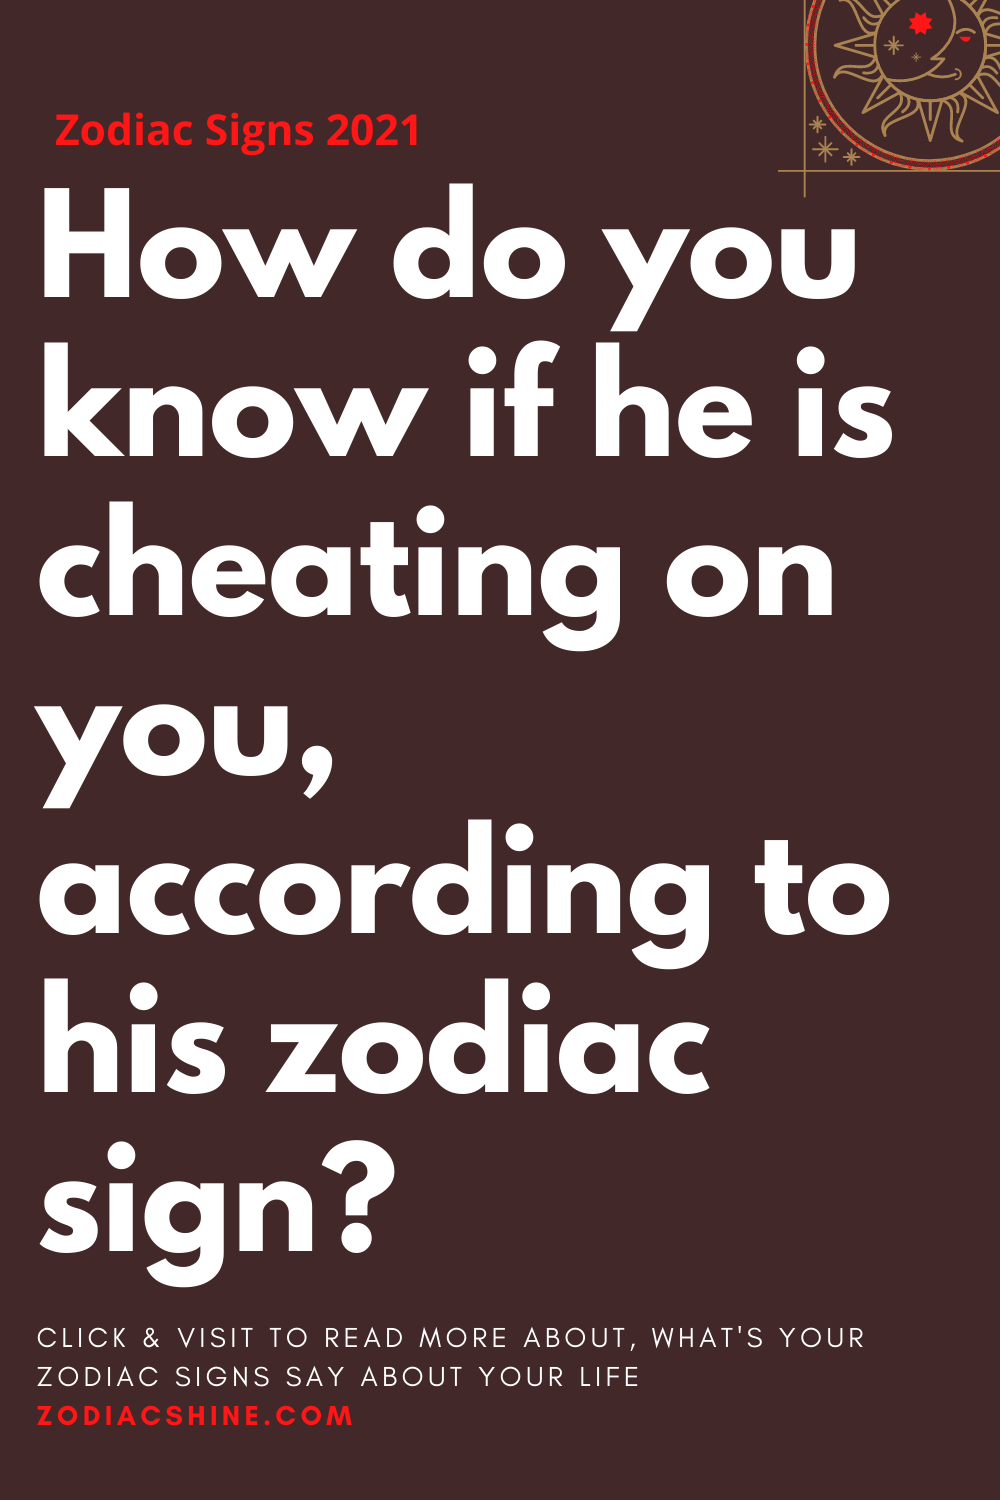 How do you know if he is cheating on you, according to his zodiac sign?